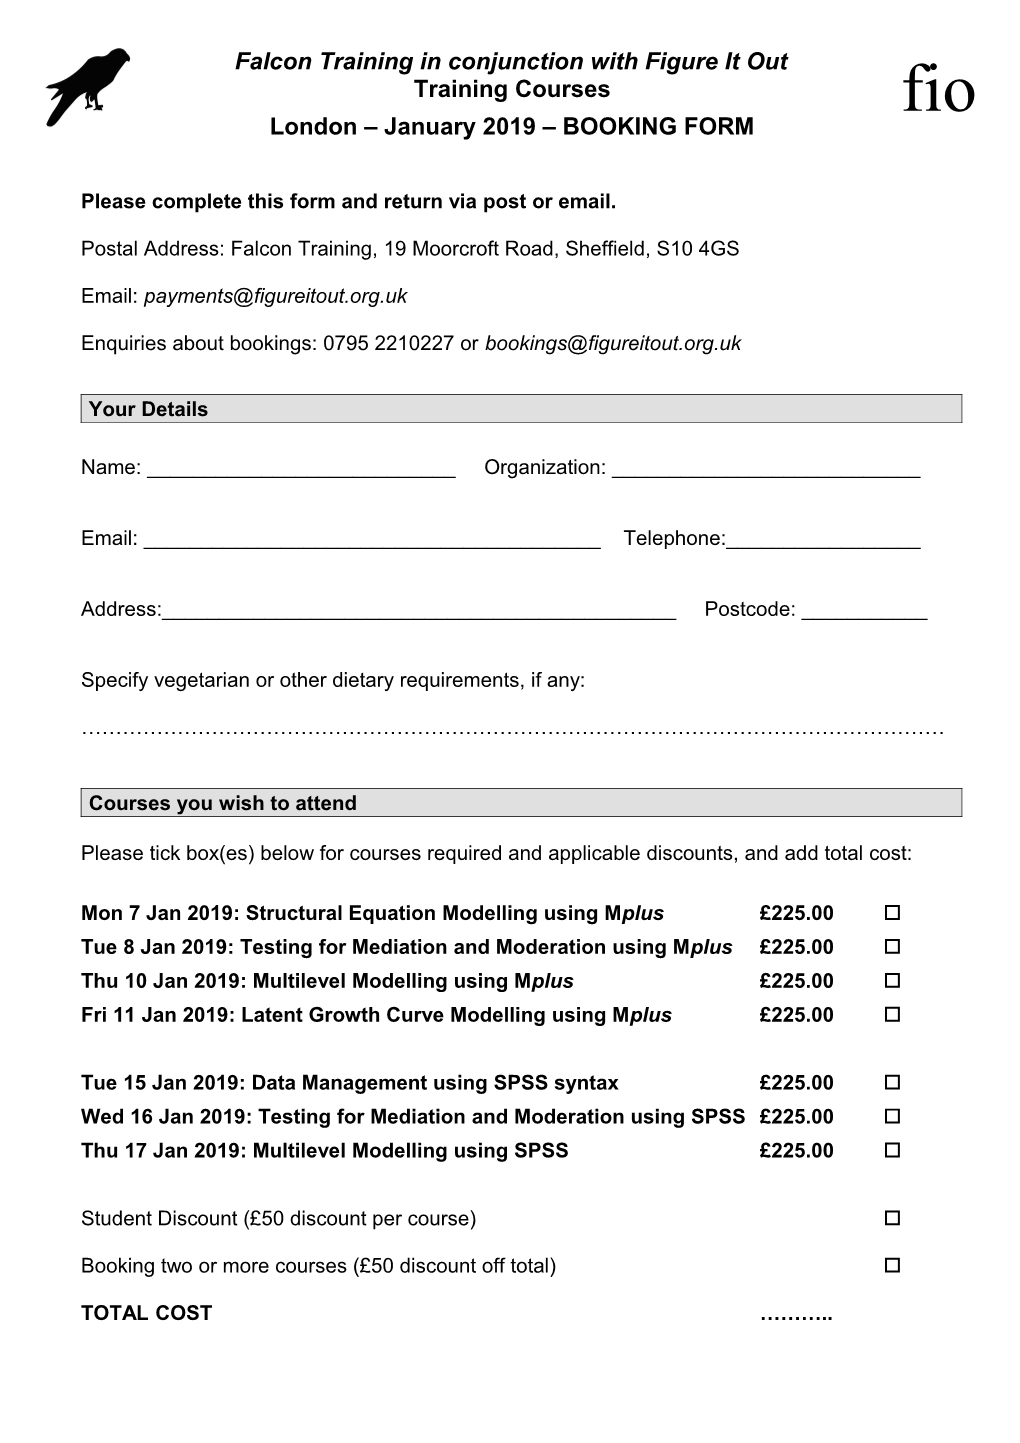 Booking Form for Training Courses: June 2008